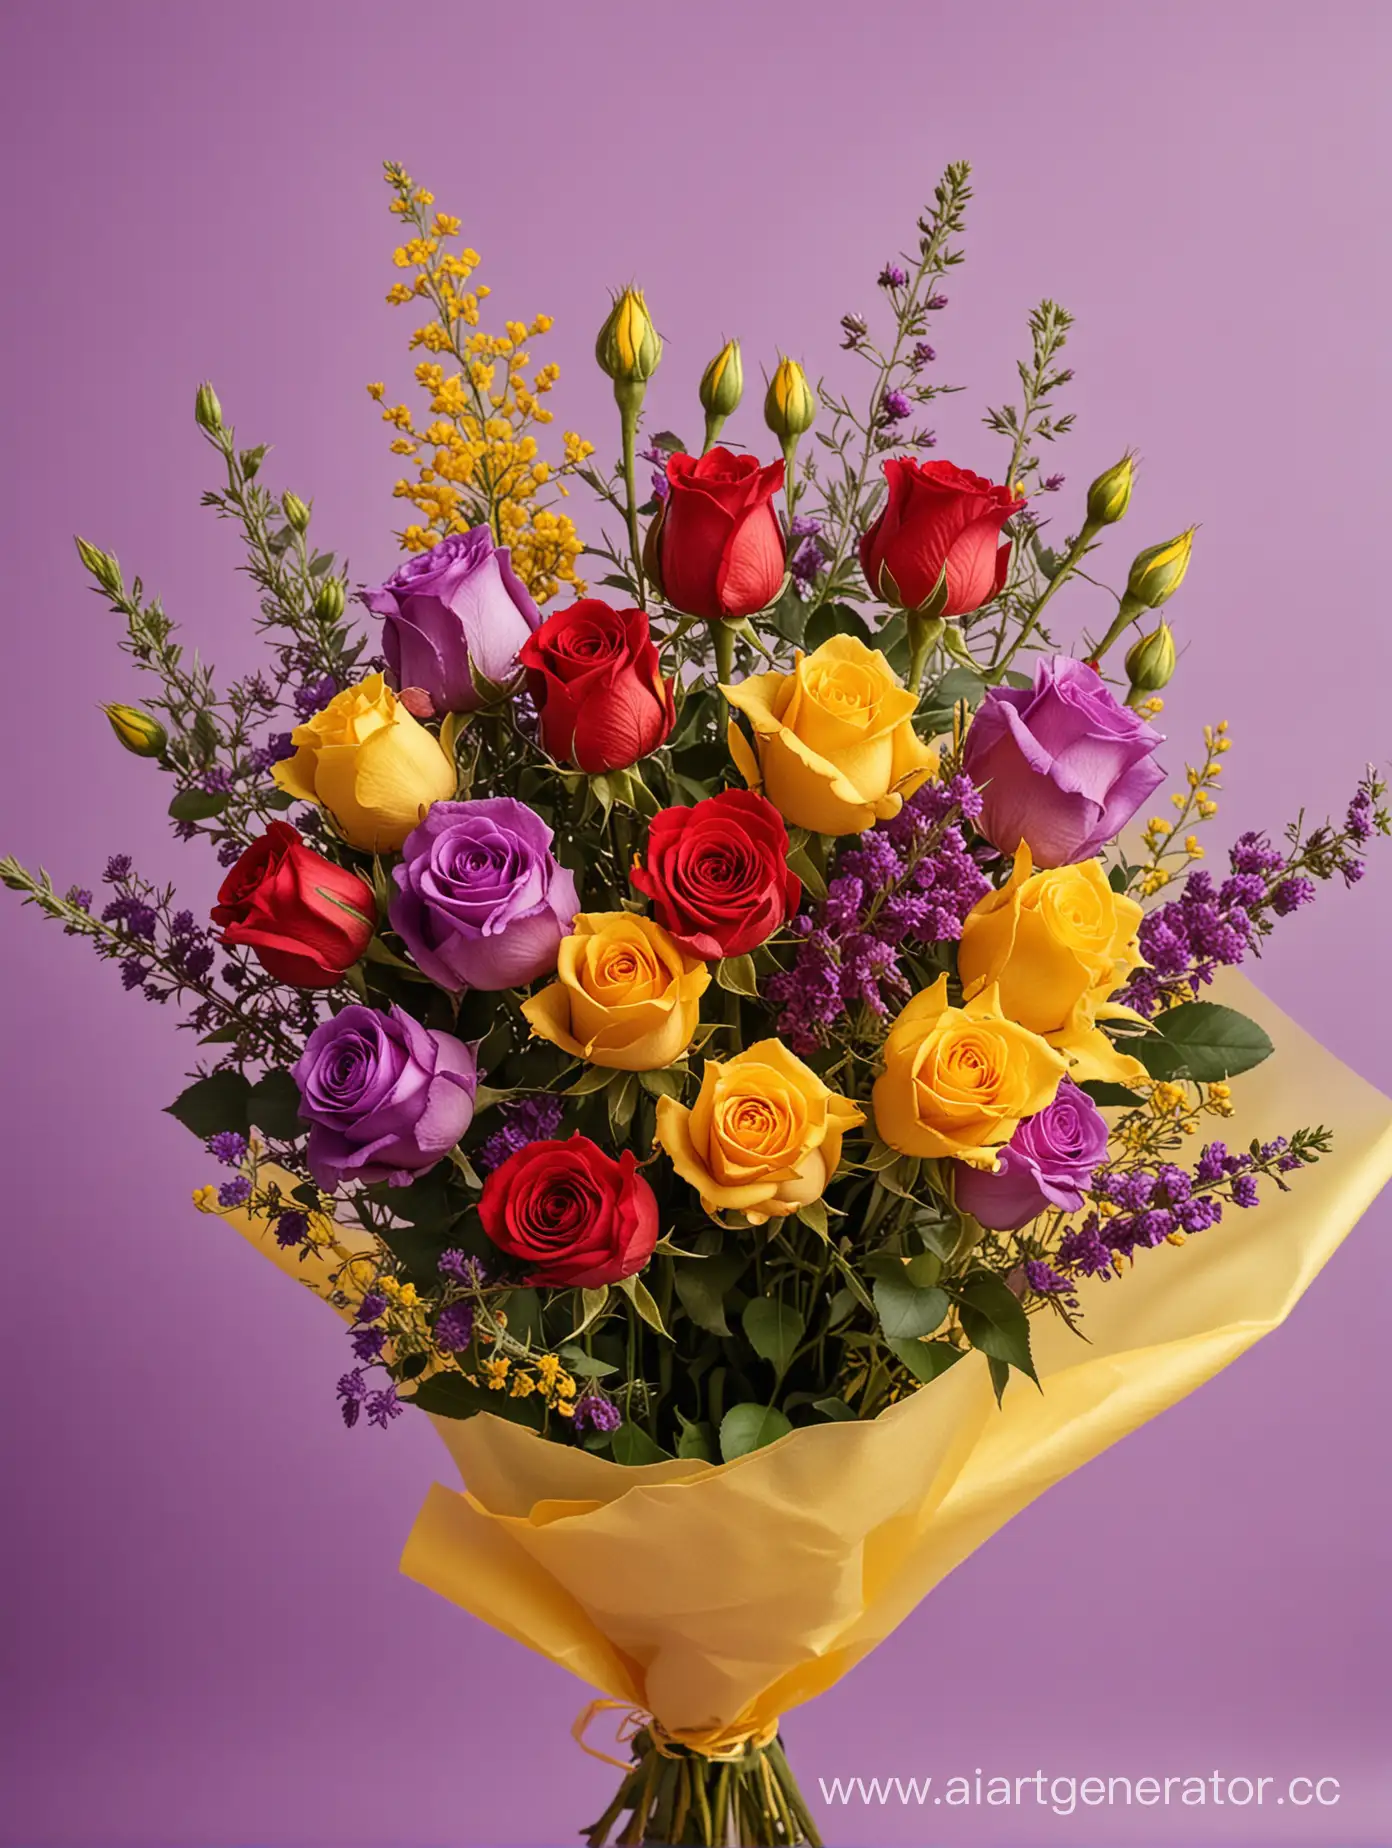 Unusual-Flower-Bouquet-with-Red-Roses-on-a-YellowPurple-Background